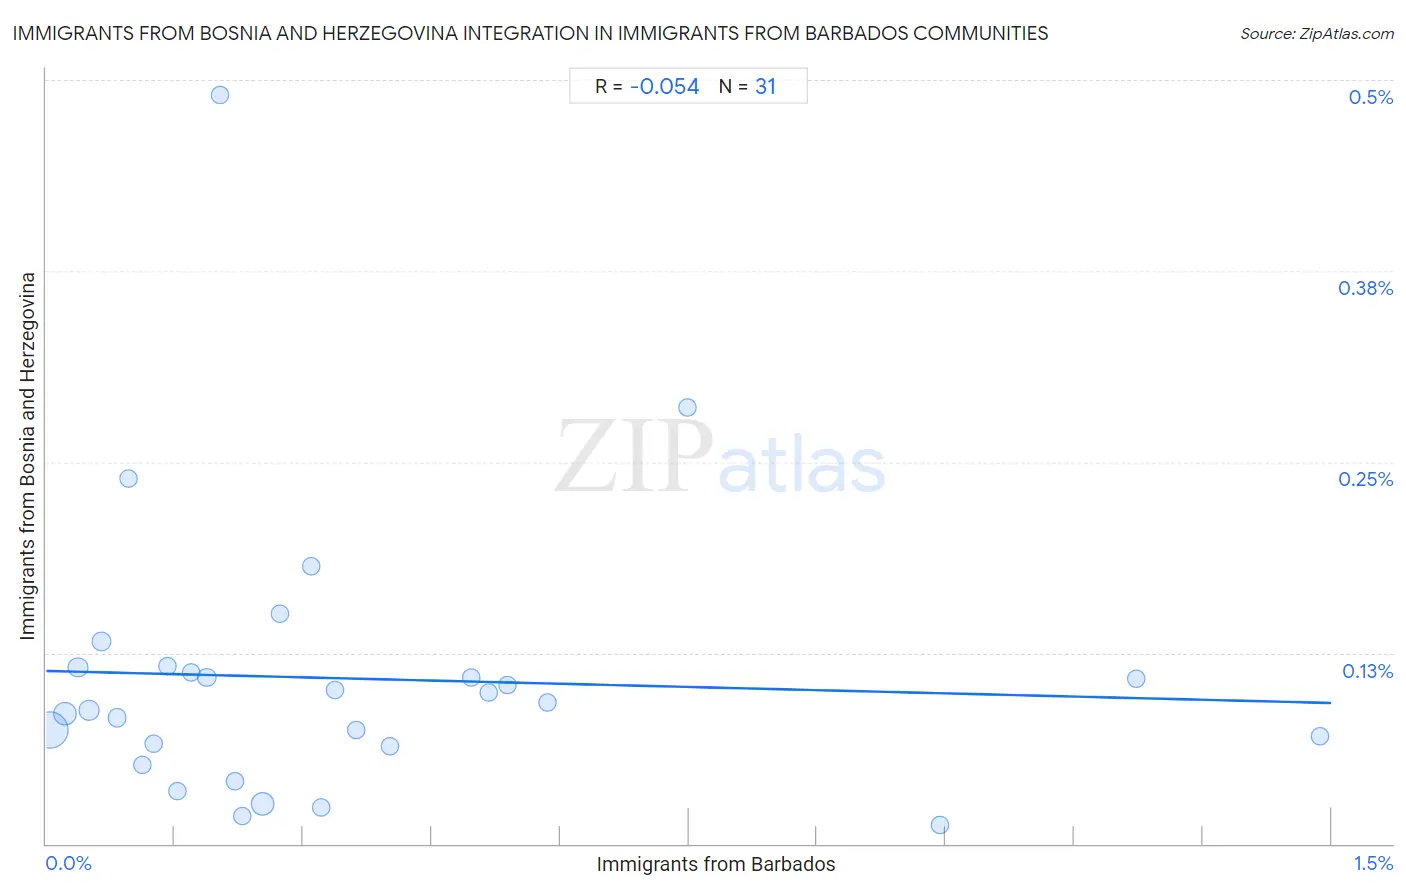 Immigrants from Barbados Integration in Immigrants from Bosnia and Herzegovina Communities